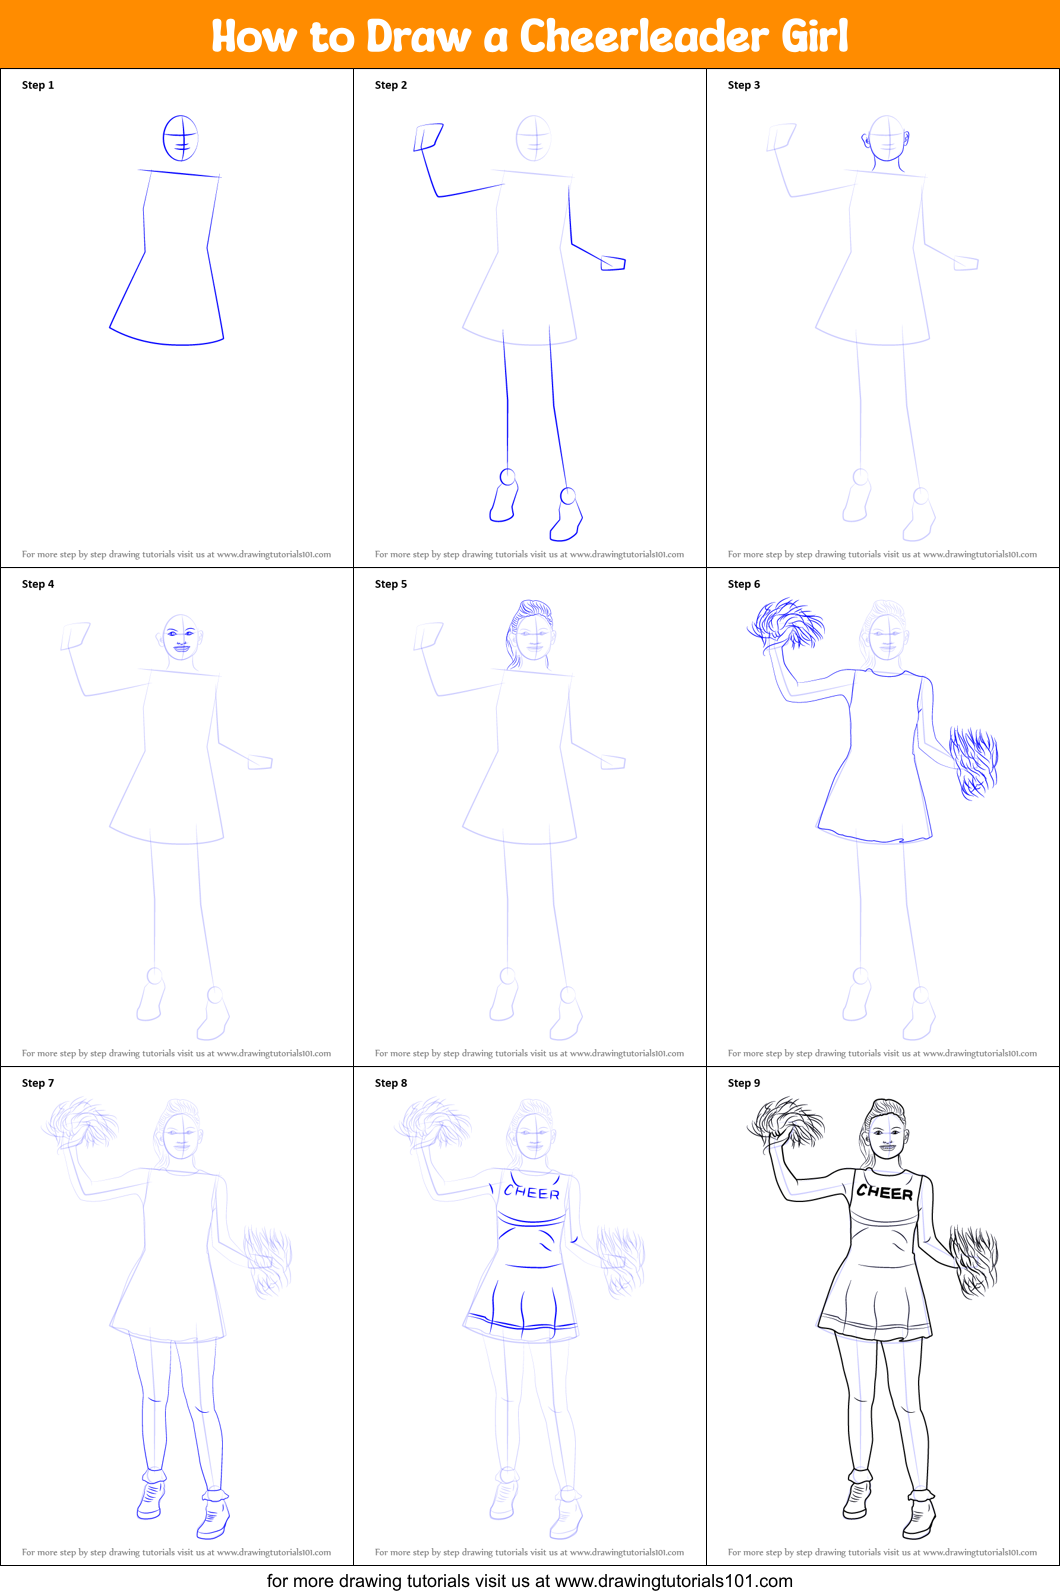 How To Draw A Cheerleader Girl Other Occupations Step By Step